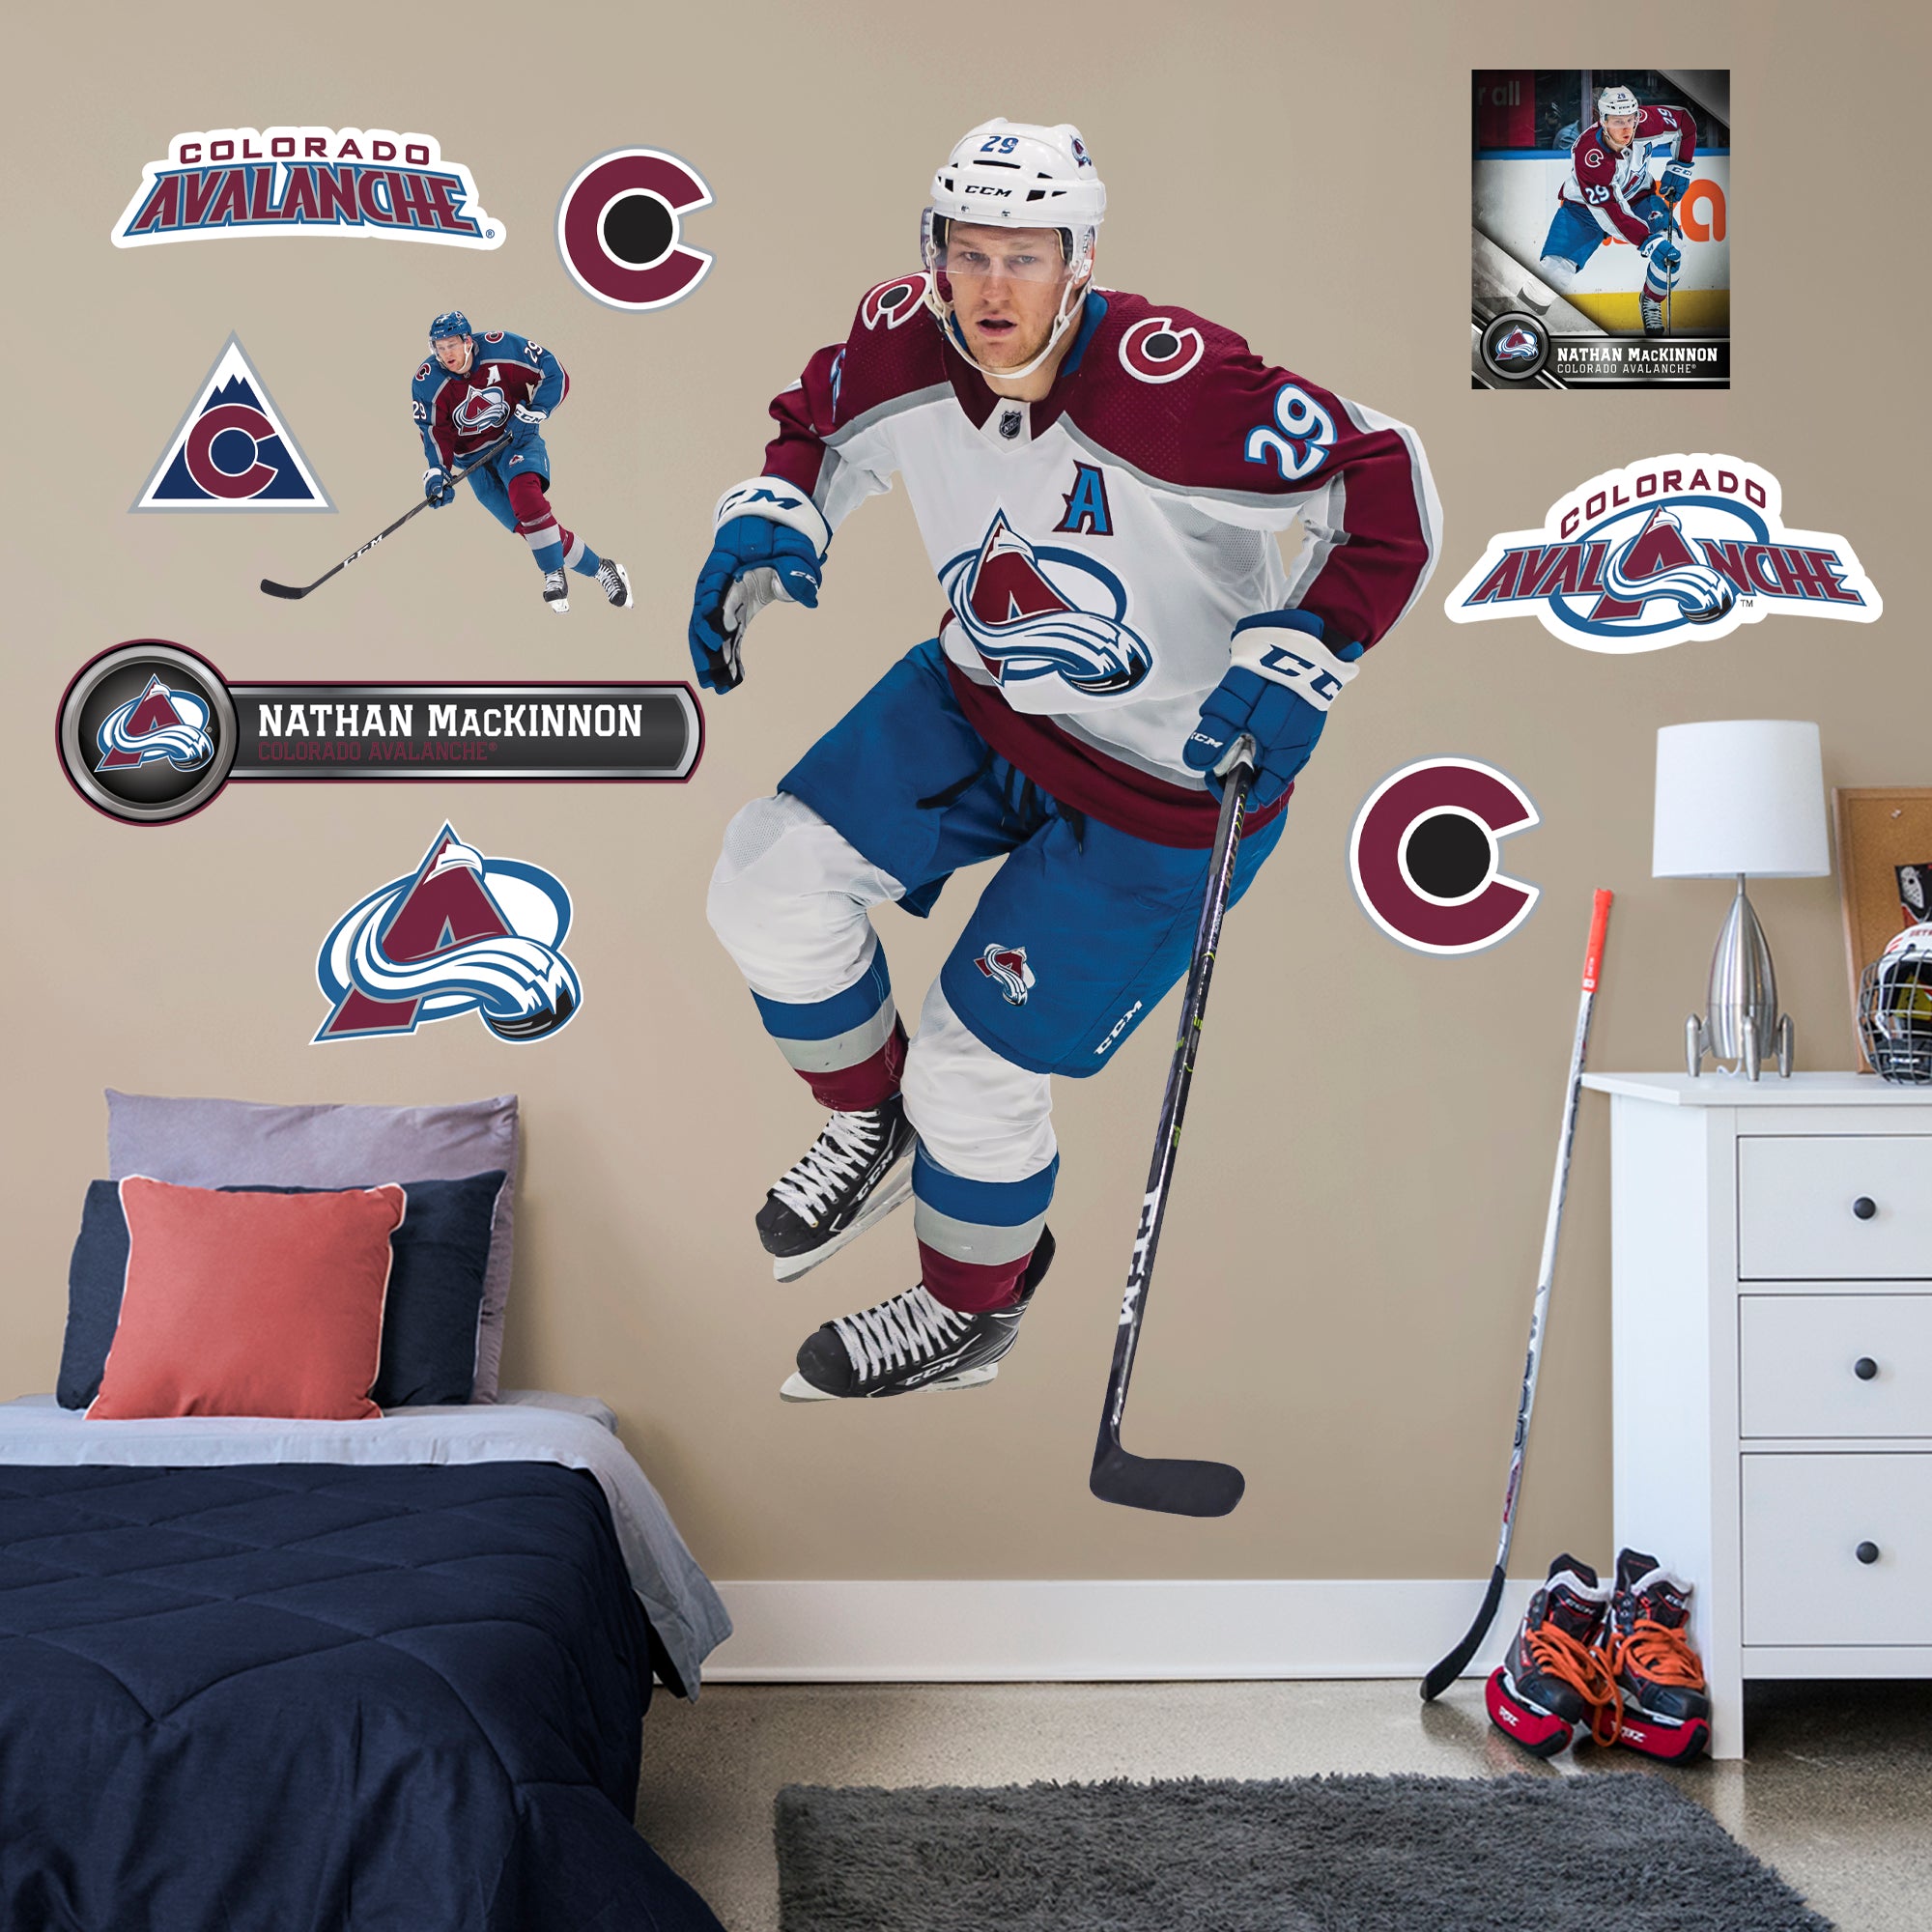 Colorado Avalanche: Cale Makar 2021 - Officially Licensed NHL Removabl –  Fathead